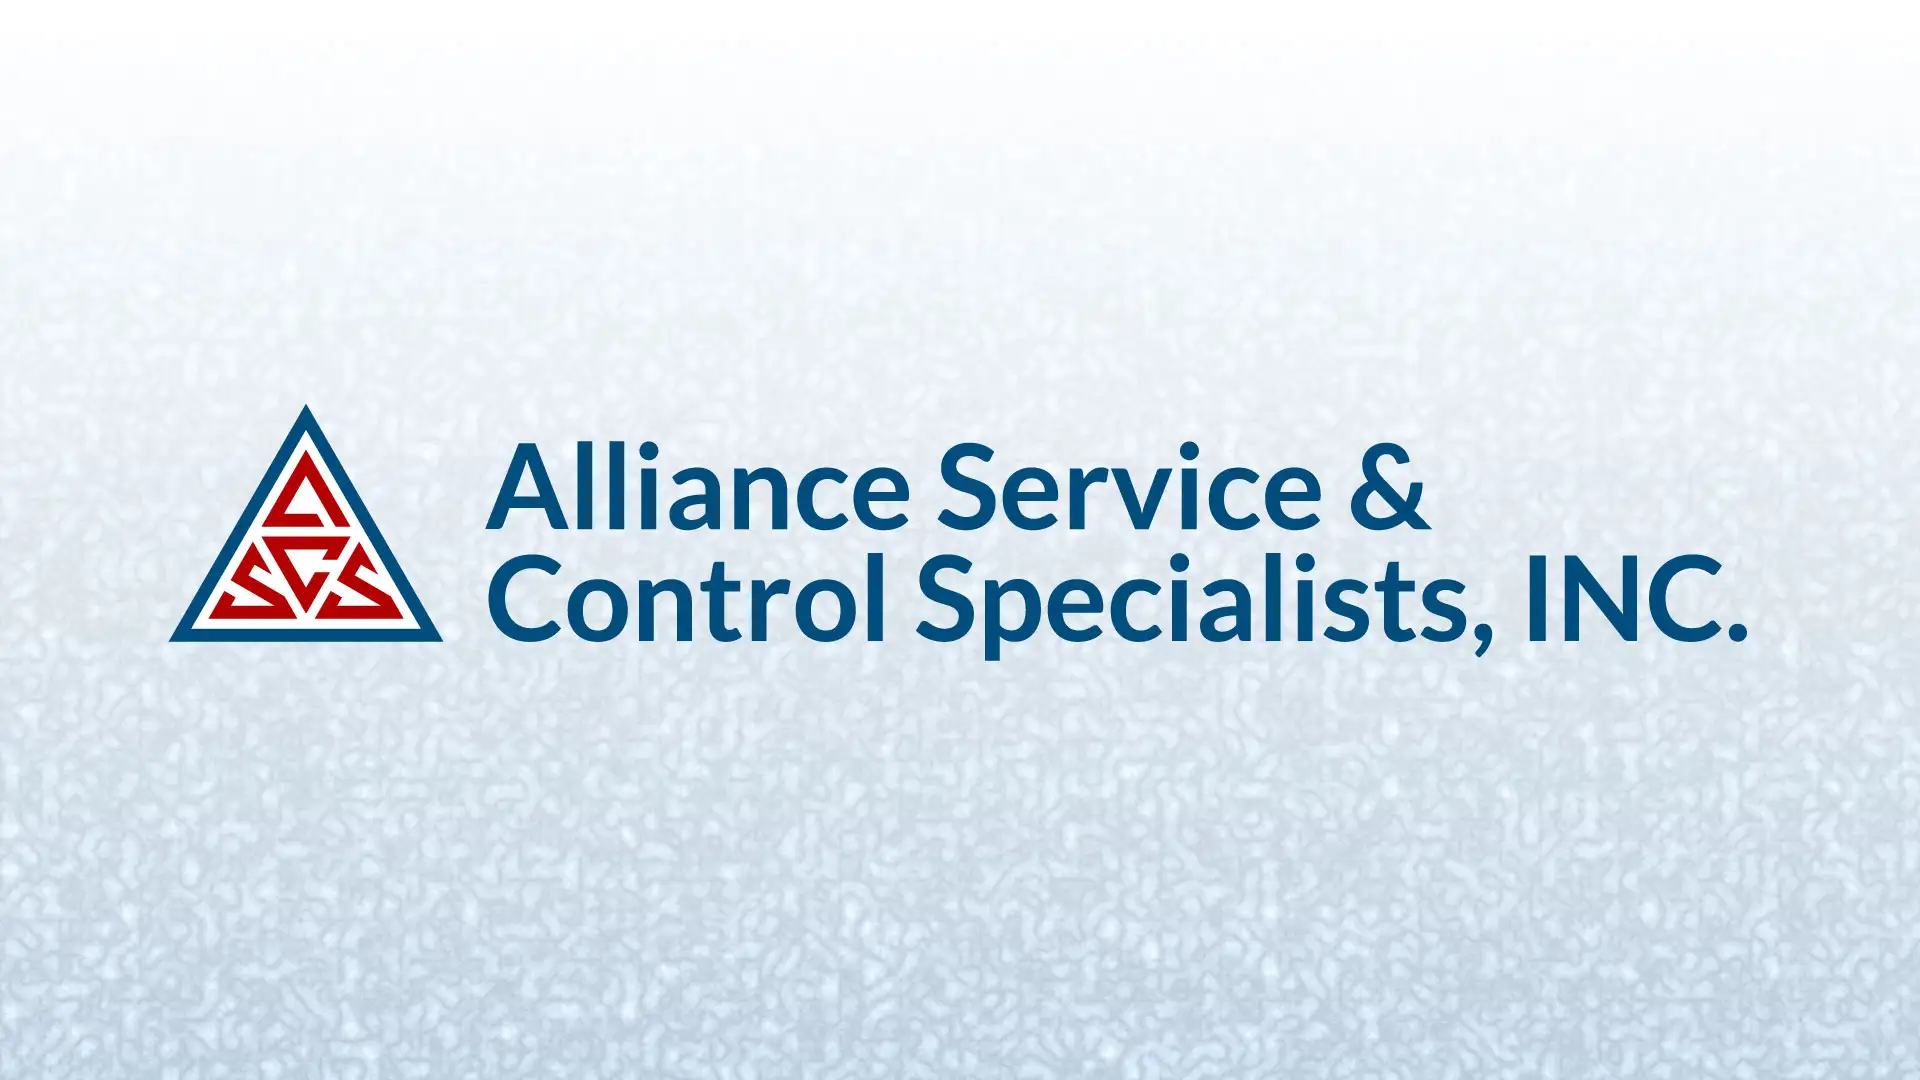 Alliance Service & Control Specialists logo branding design by Dusty Drake